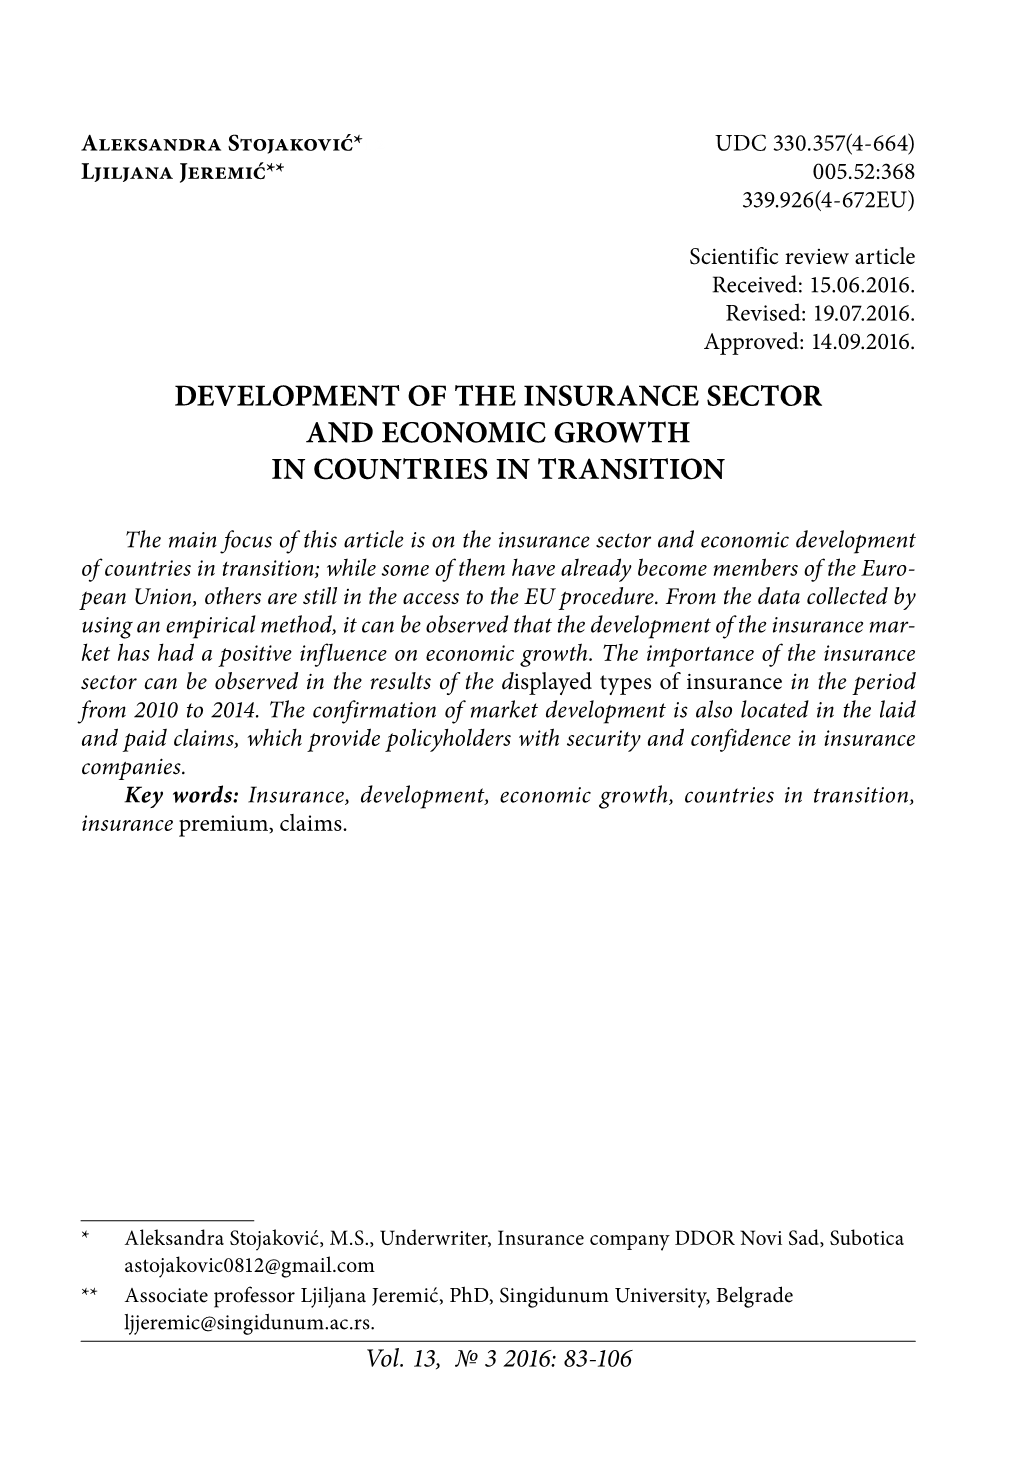 Development of the Insurance Sector and Economic Growth in Countries in Transition